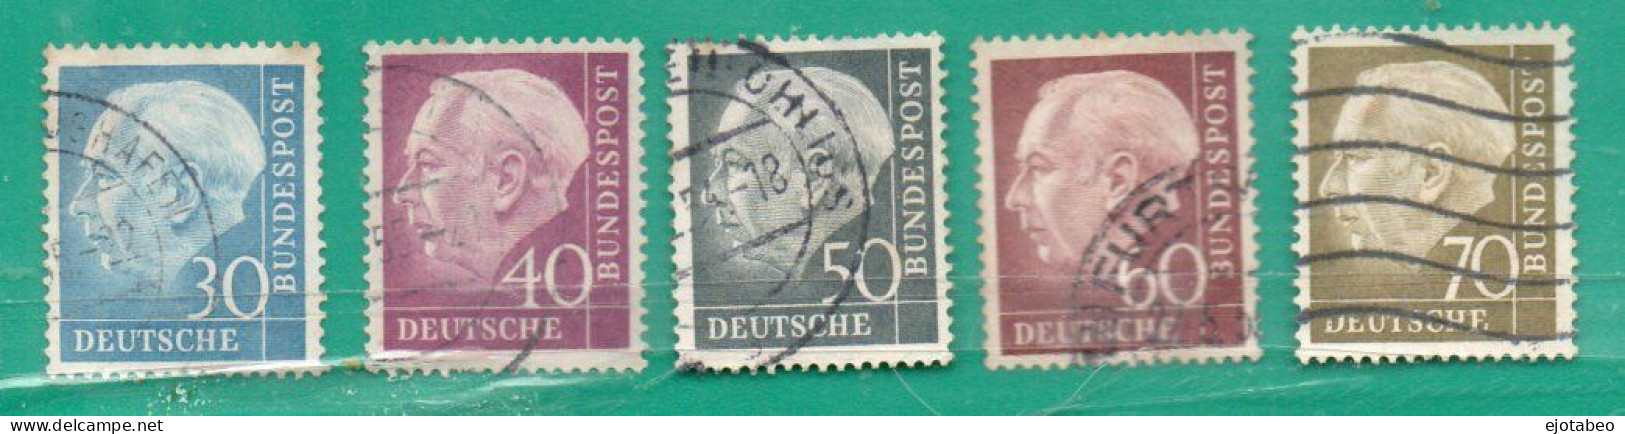 68a ALEMANIA FEDERAL(OCCIDENTAL) 1953/54 YT 70,71,71A,71B,71C  TT: Personalidades: Teodoro Heuss  Yvert E 9.70 - Used Stamps